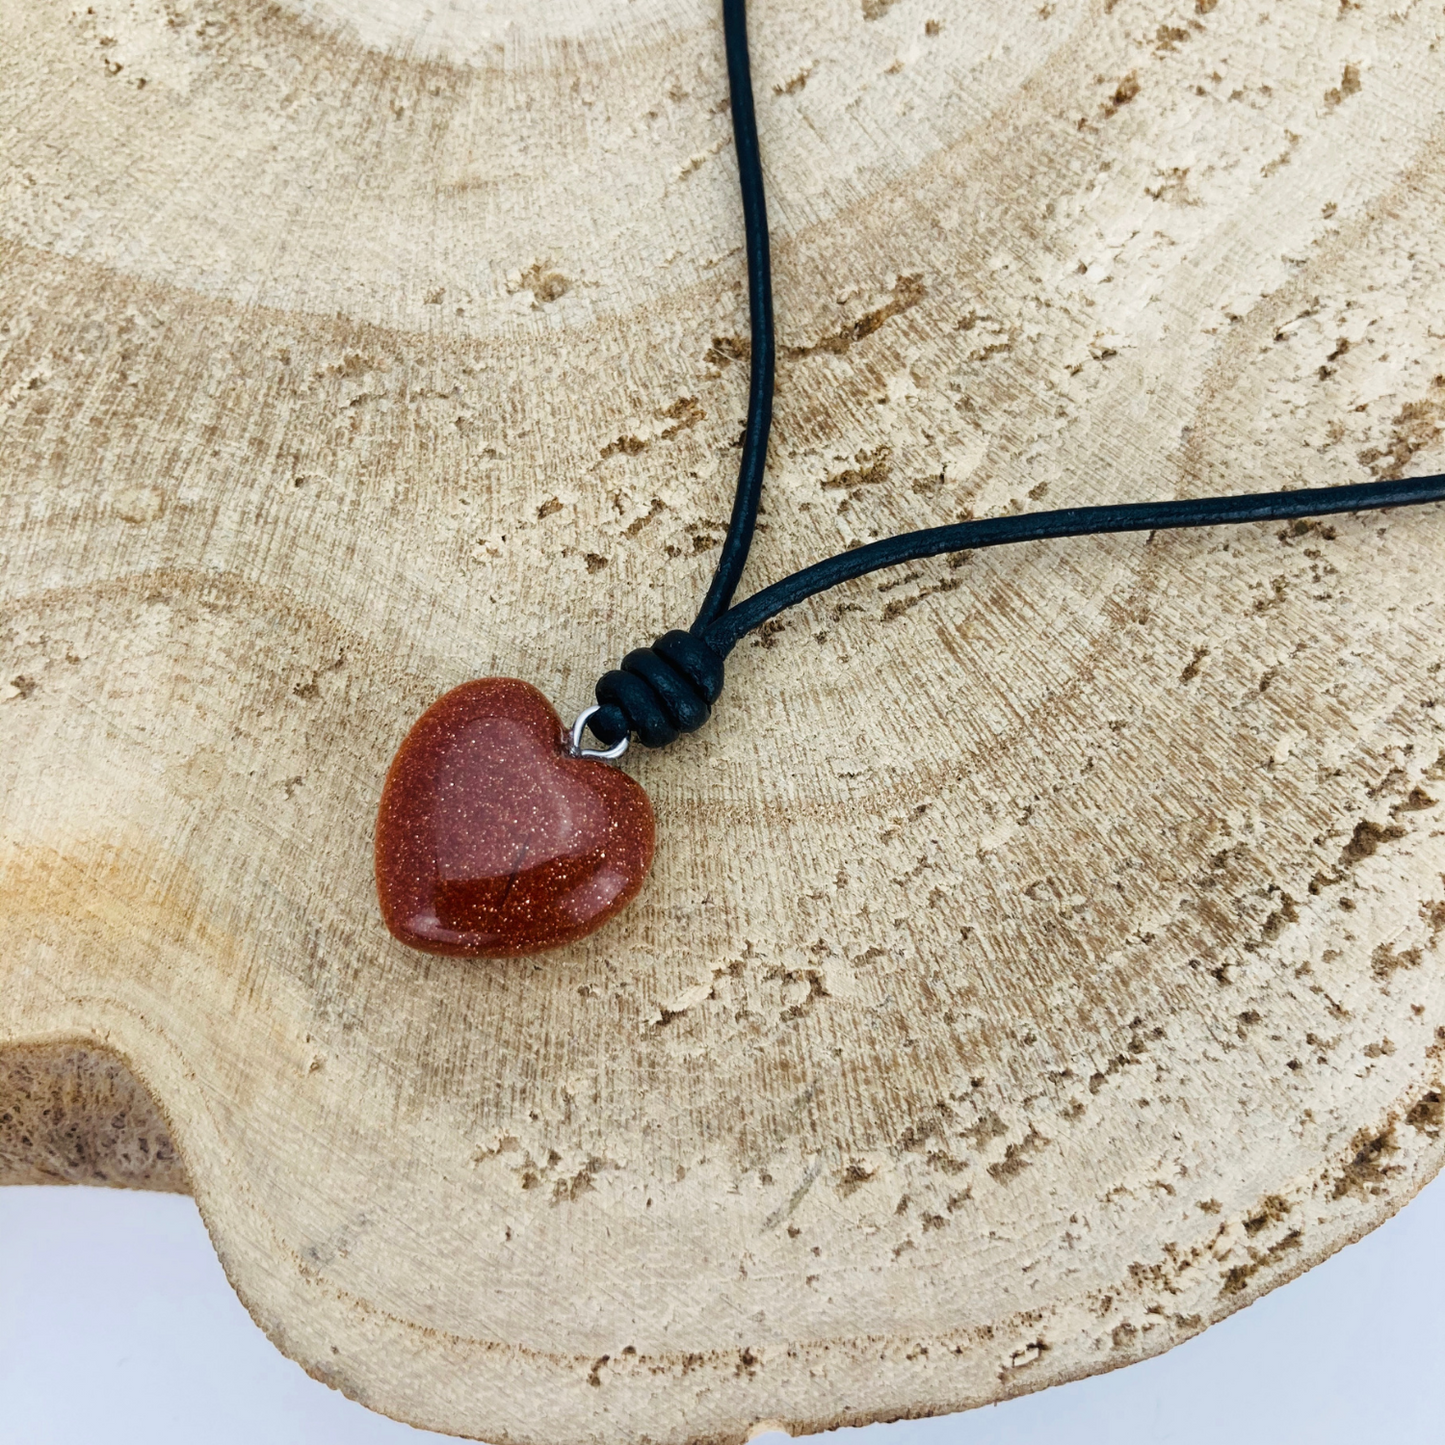 Leather Choker Necklace with Natural Goldstone Heart Pendant